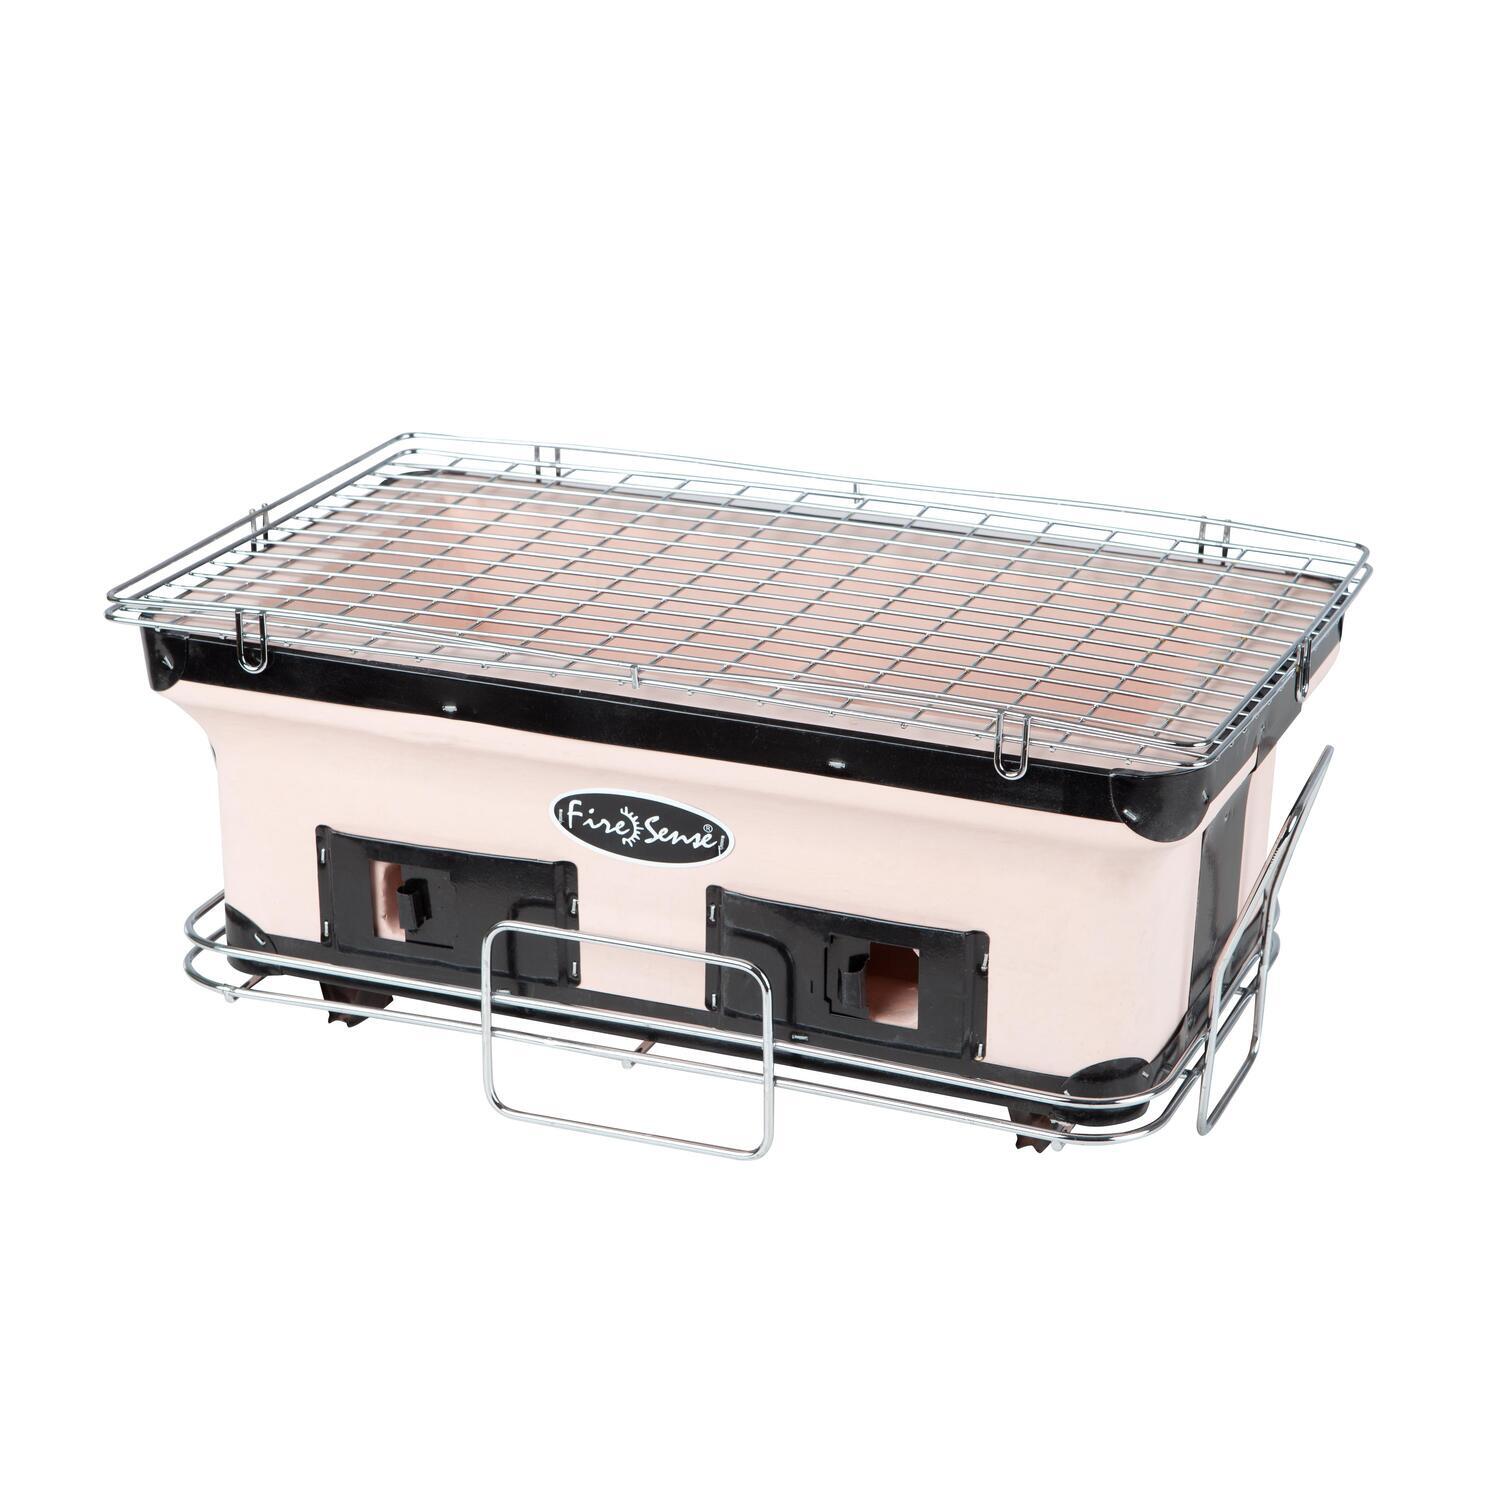 Fire Sense 17" Charcoal Grill - image 1 of 7